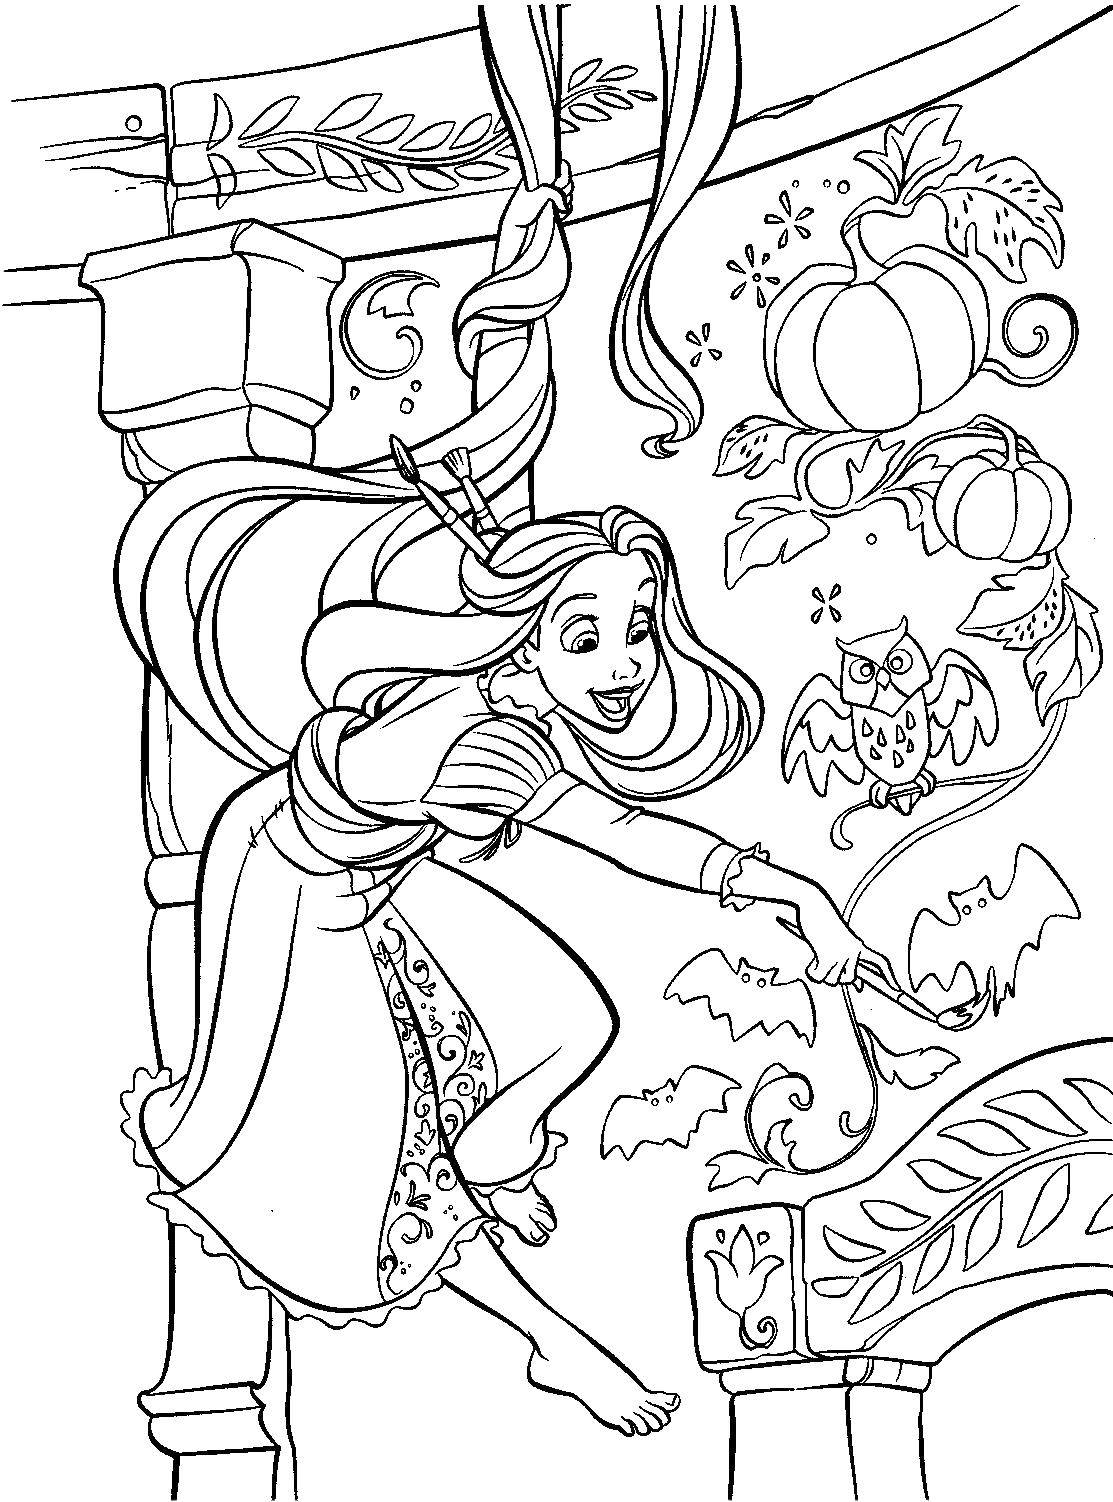 Coloring Rapunzel weighs on the hair. Category coloring pages Rapunzel tangled. Tags:  Rapunzel .